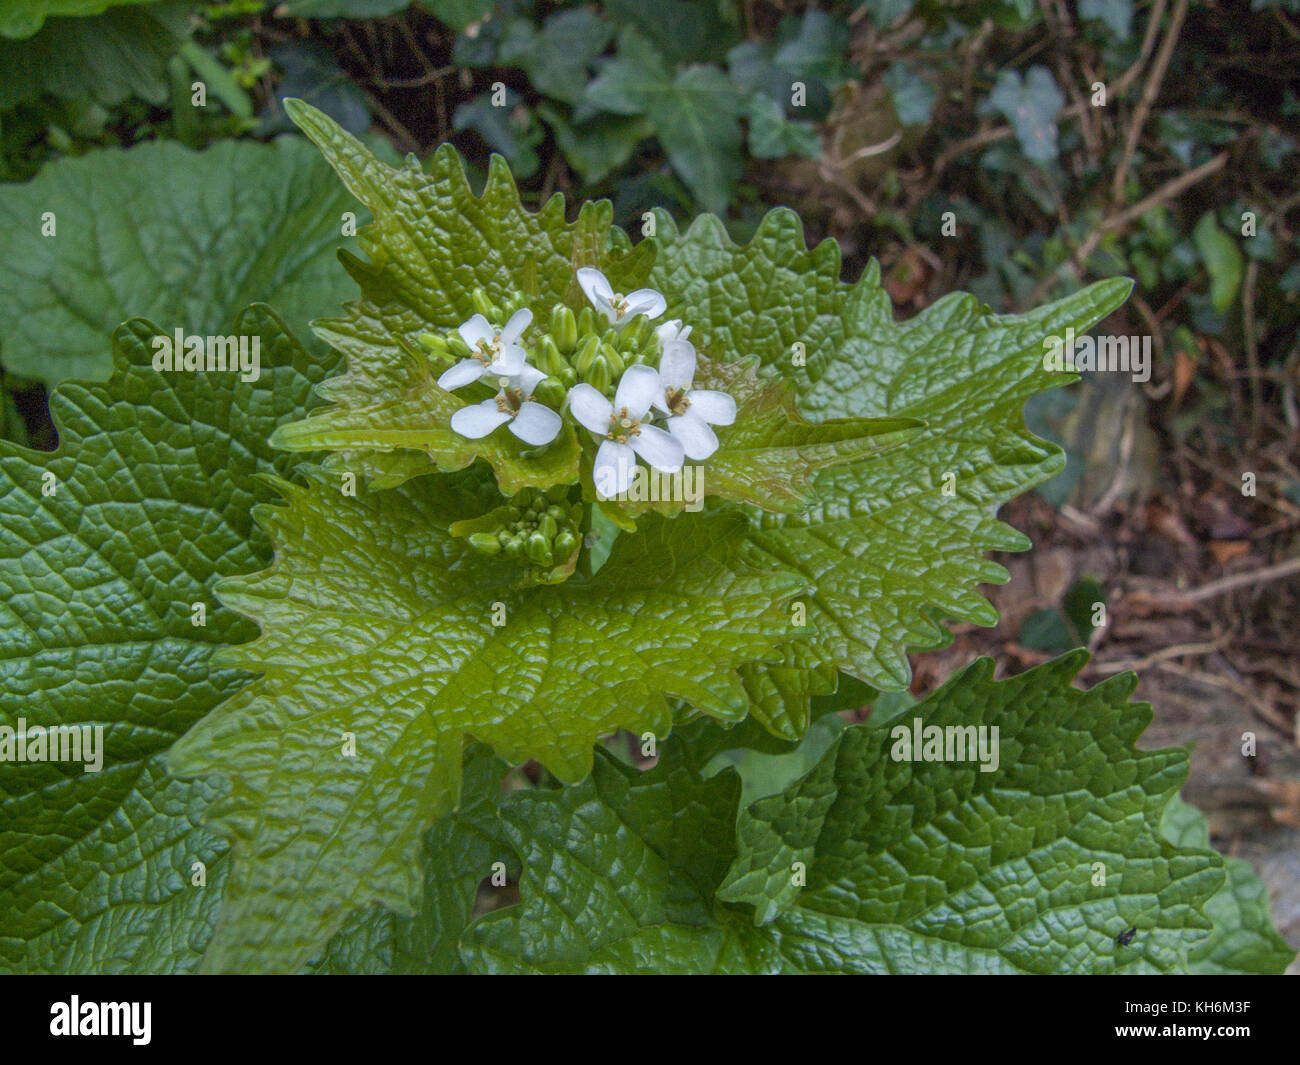 Example of the foraged plant Hedge Garlic - Alliaria petiolata - growing in a hedgerow. Leaves have a mild garlic smell and taste. Belongs to Mustards Stock Photo